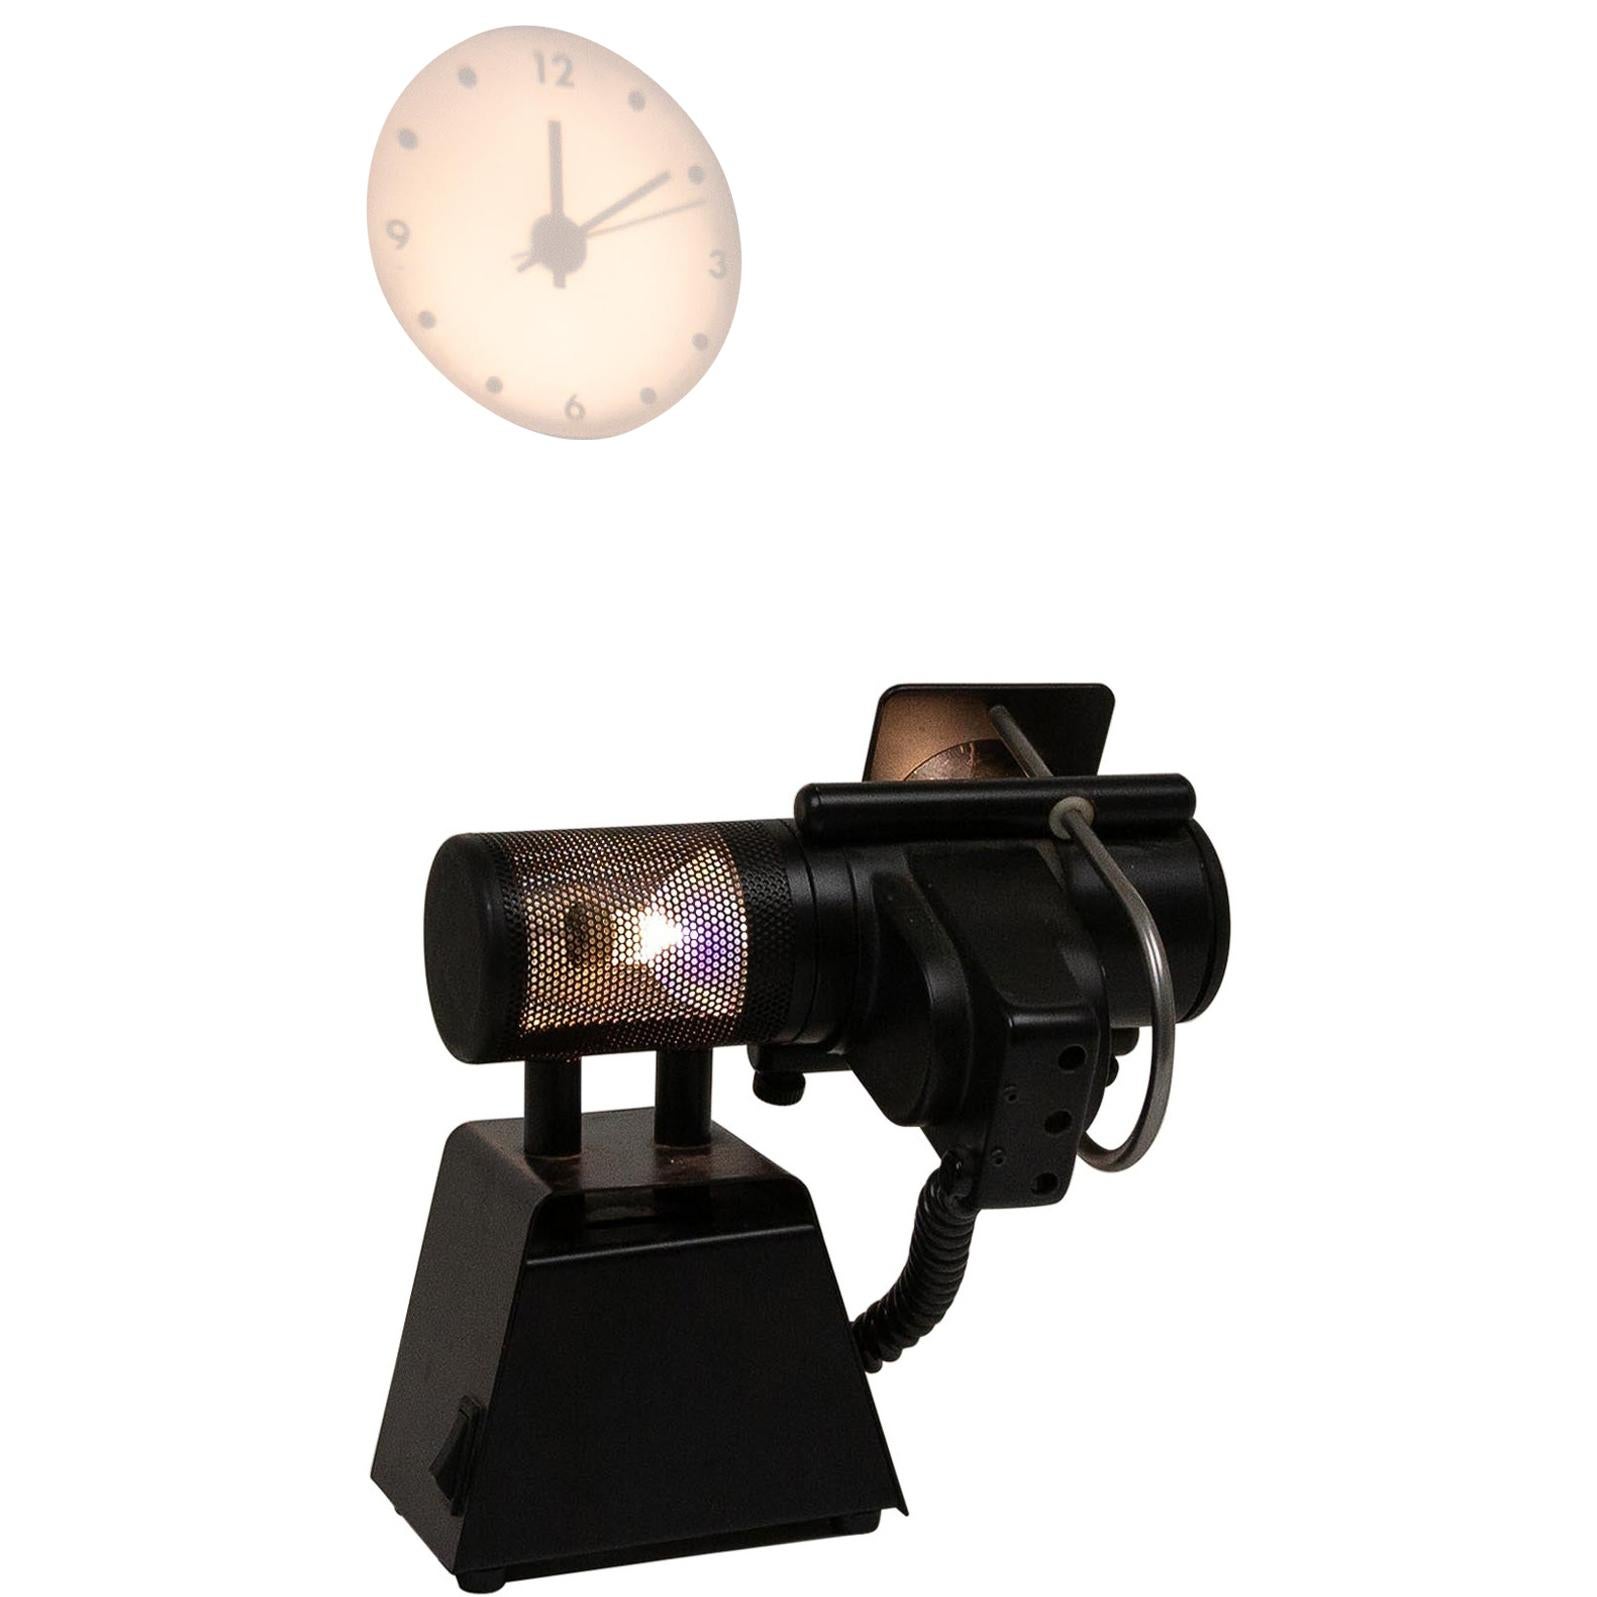 Projection Clock by Stephen Savage for Timebeam, 1980s